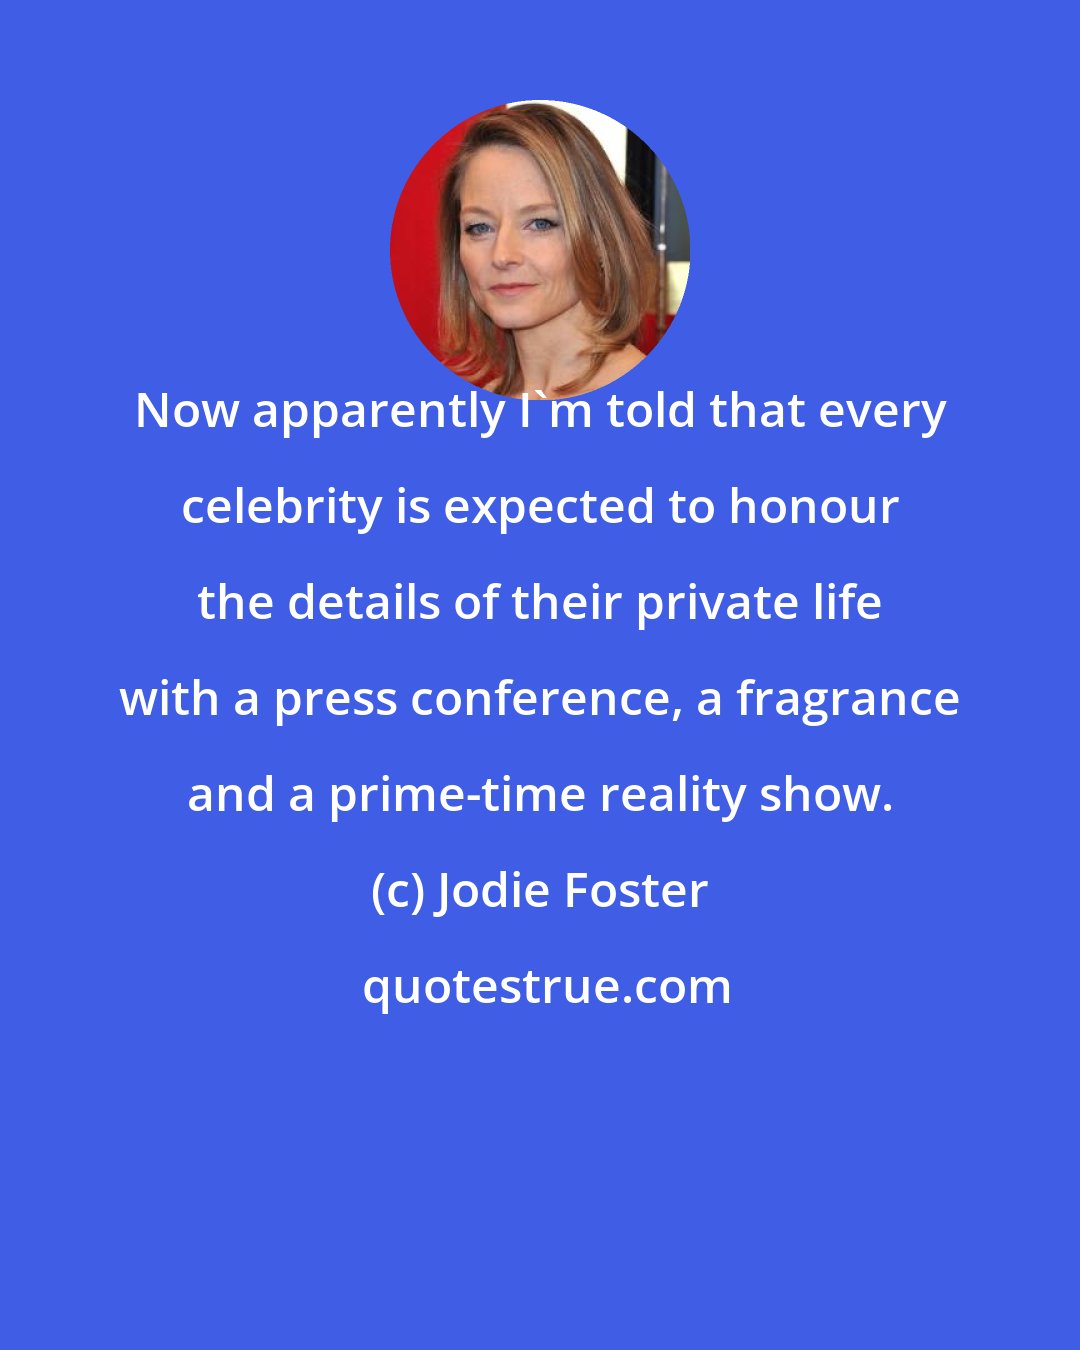 Jodie Foster: Now apparently I'm told that every celebrity is expected to honour the details of their private life with a press conference, a fragrance and a prime-time reality show.